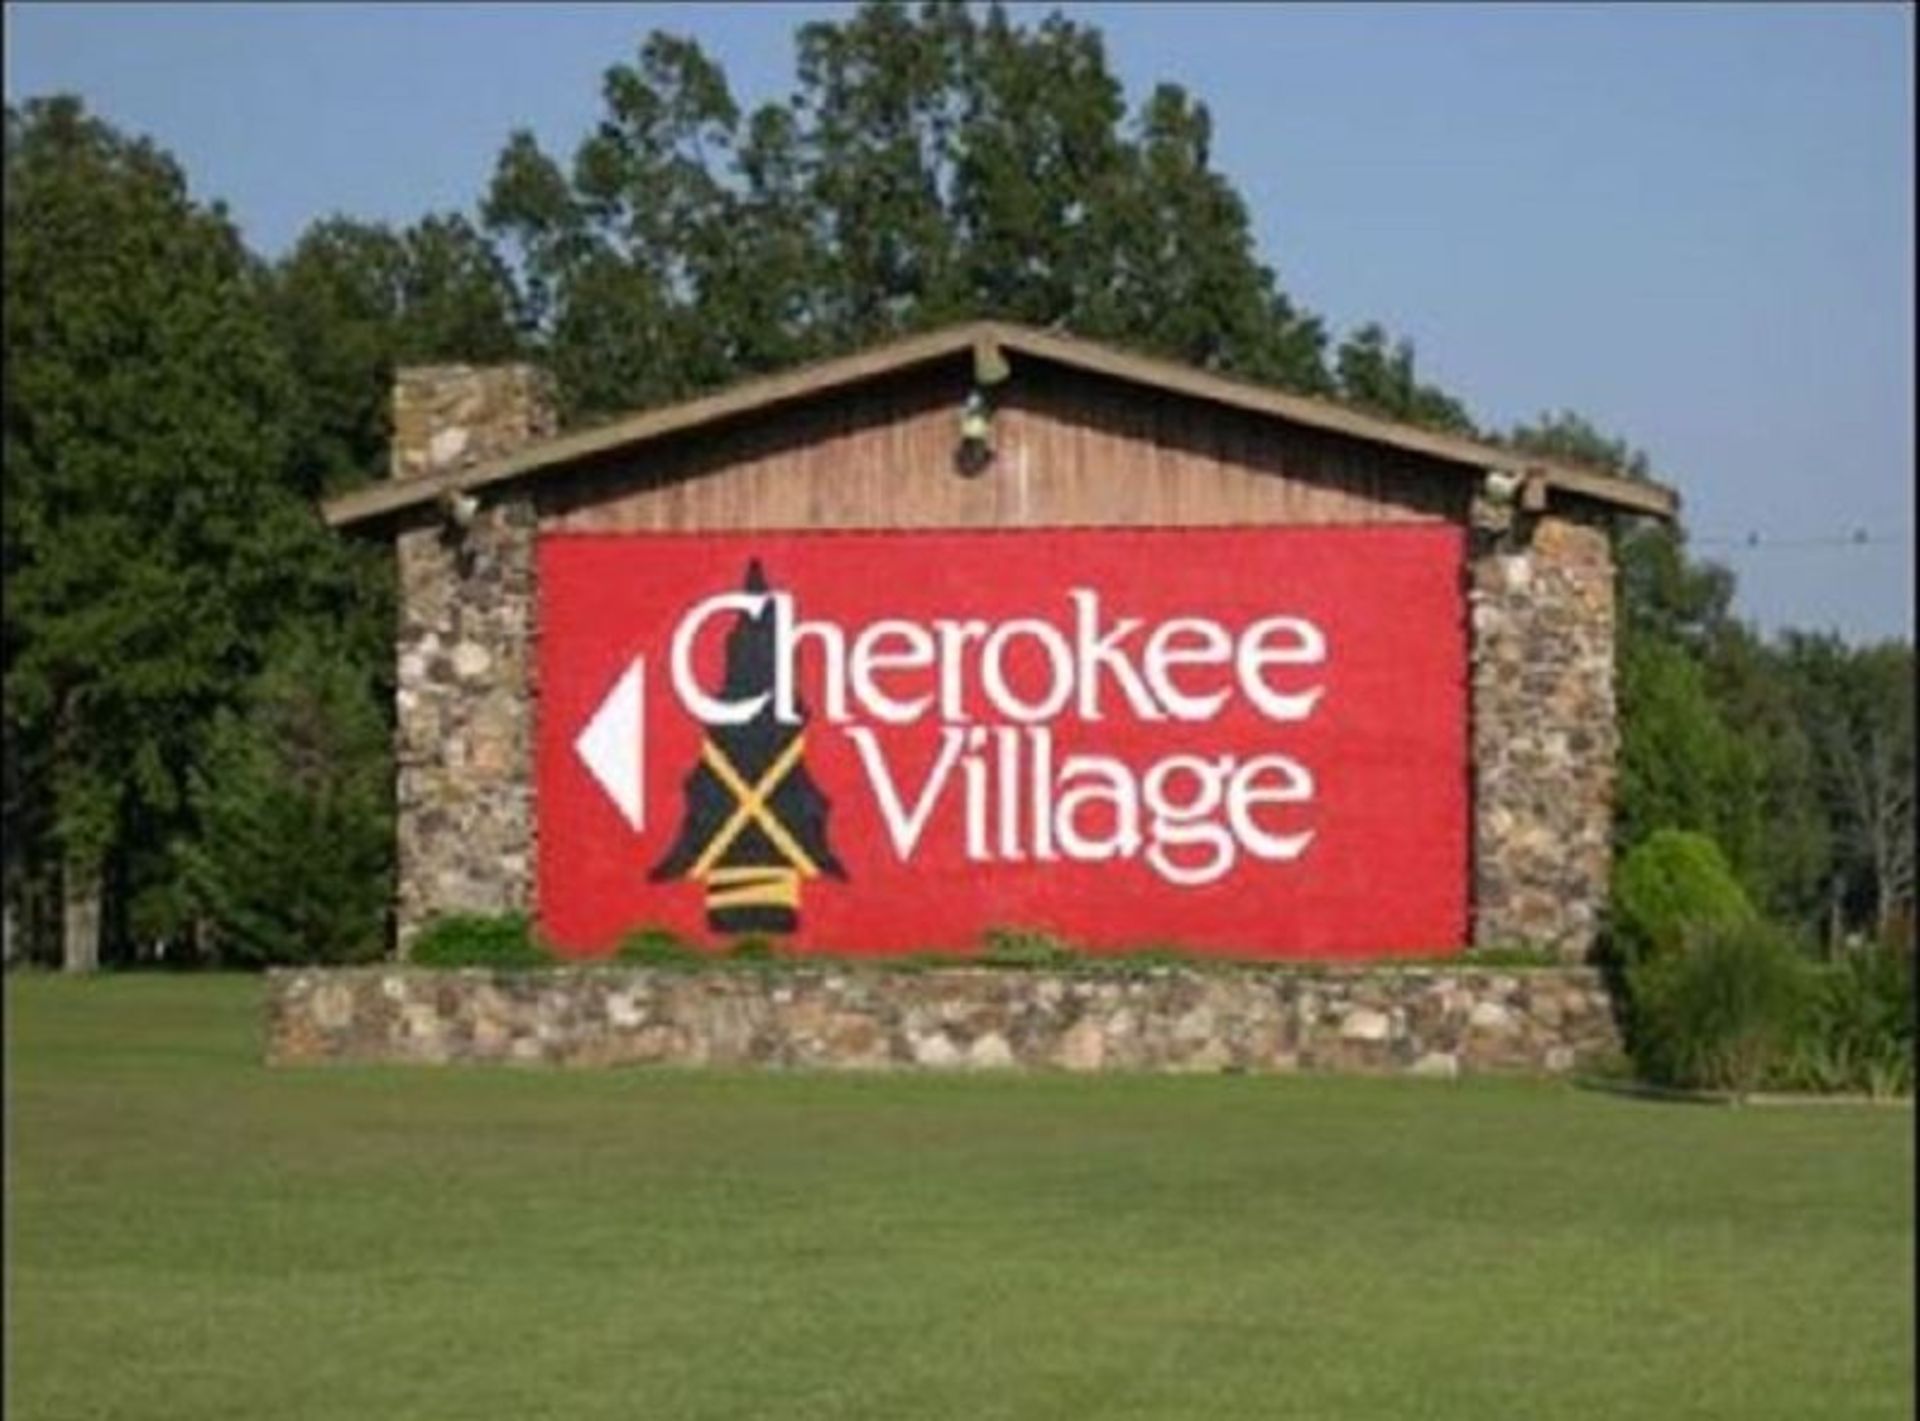 Exceptional Opportunity: 20 Developable Lots in Cherokee Village, Arkansas! BIDDING IS PER LOT! - Image 10 of 10